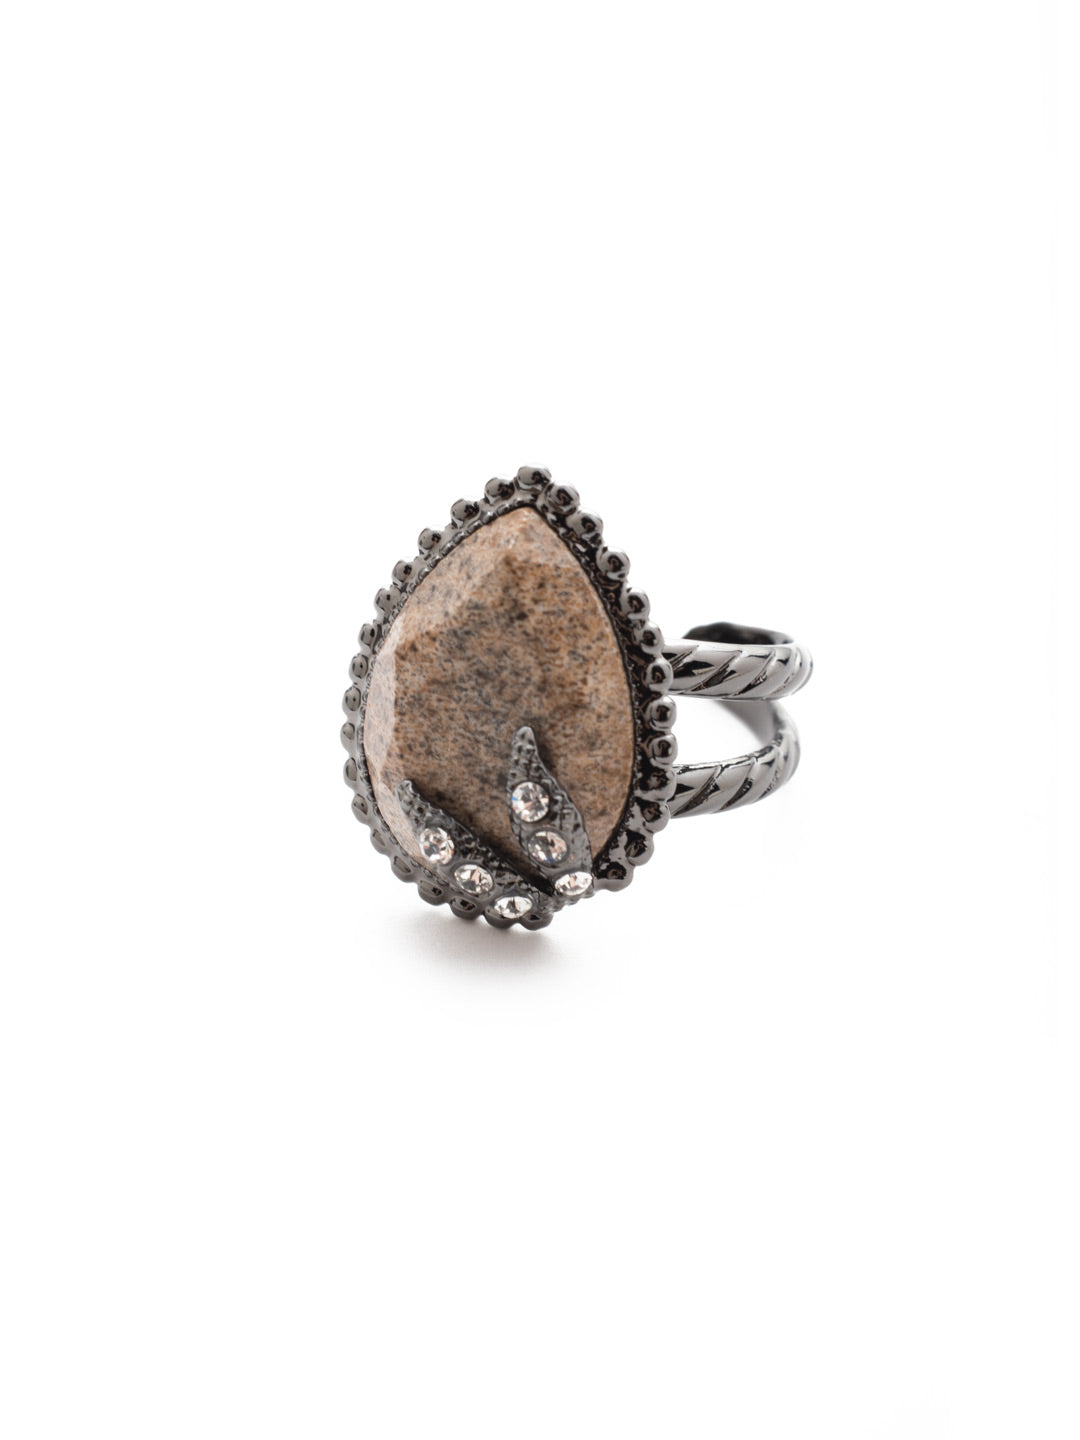 Forrest Cocktail Ring - REU10GMGNS - Make a bold statement with our Forrest Cocktail Ring. Featuring an earthy pear-shaped stone wrapped in a touch of crystal sparkle, you'll have the coolest ring in the room. From Sorrelli's Golden Shadow collection in our Gun Metal finish.